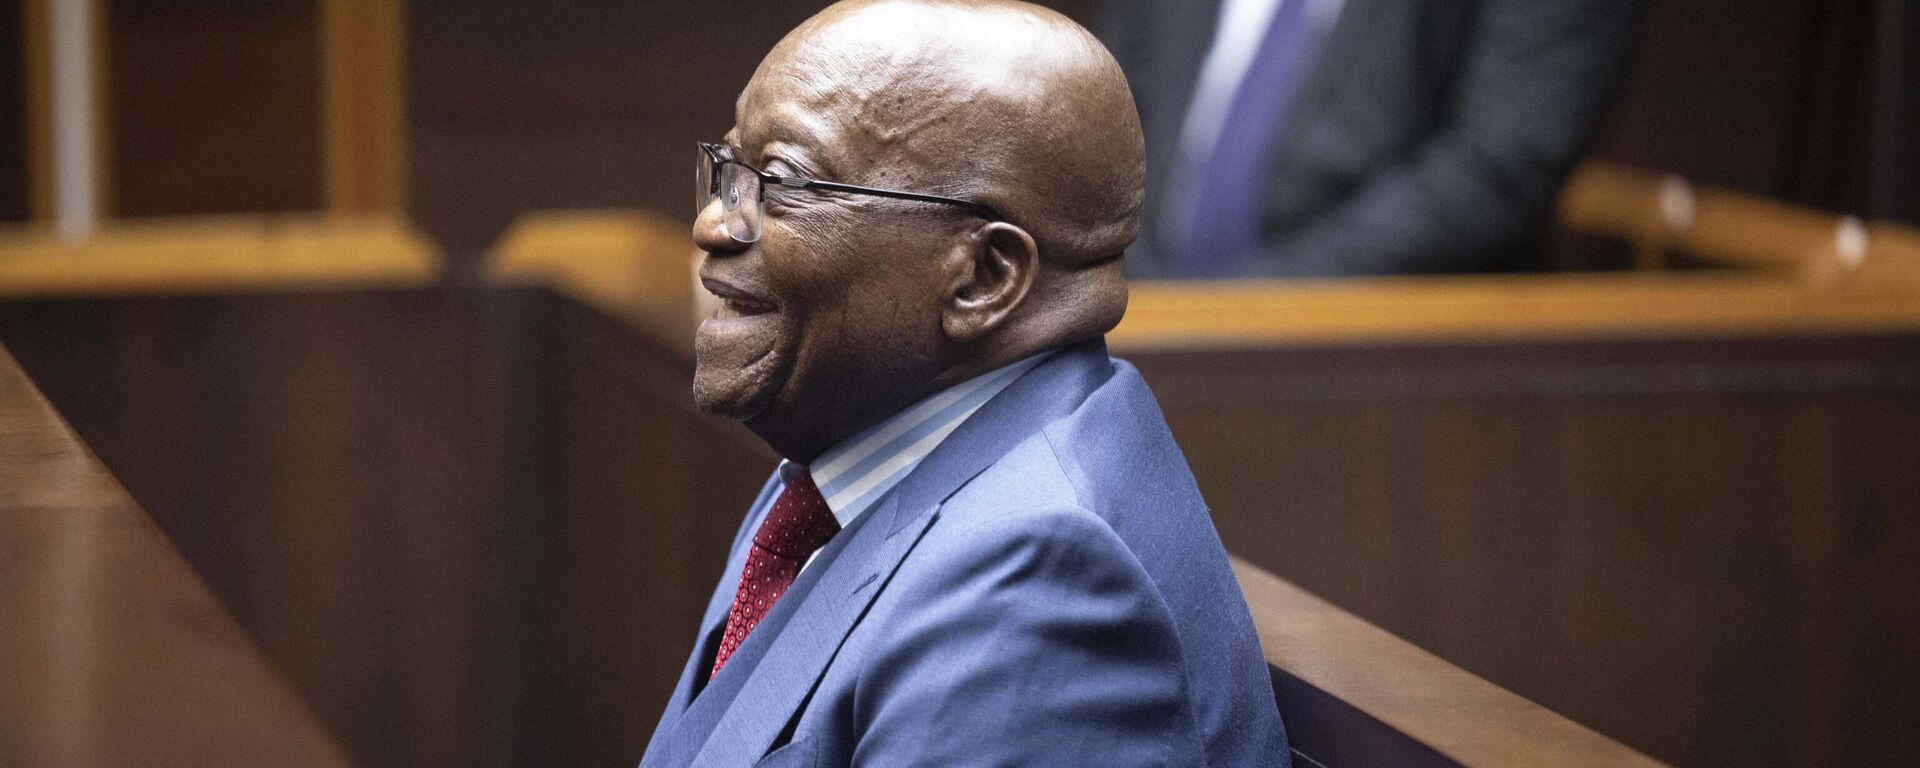 Former South African President Jacob Zuma appears at the Pietermaritzburg High Court in Pietermaritzburg, South Africa, on April 17, 2023 - Sputnik Africa, 1920, 17.04.2023